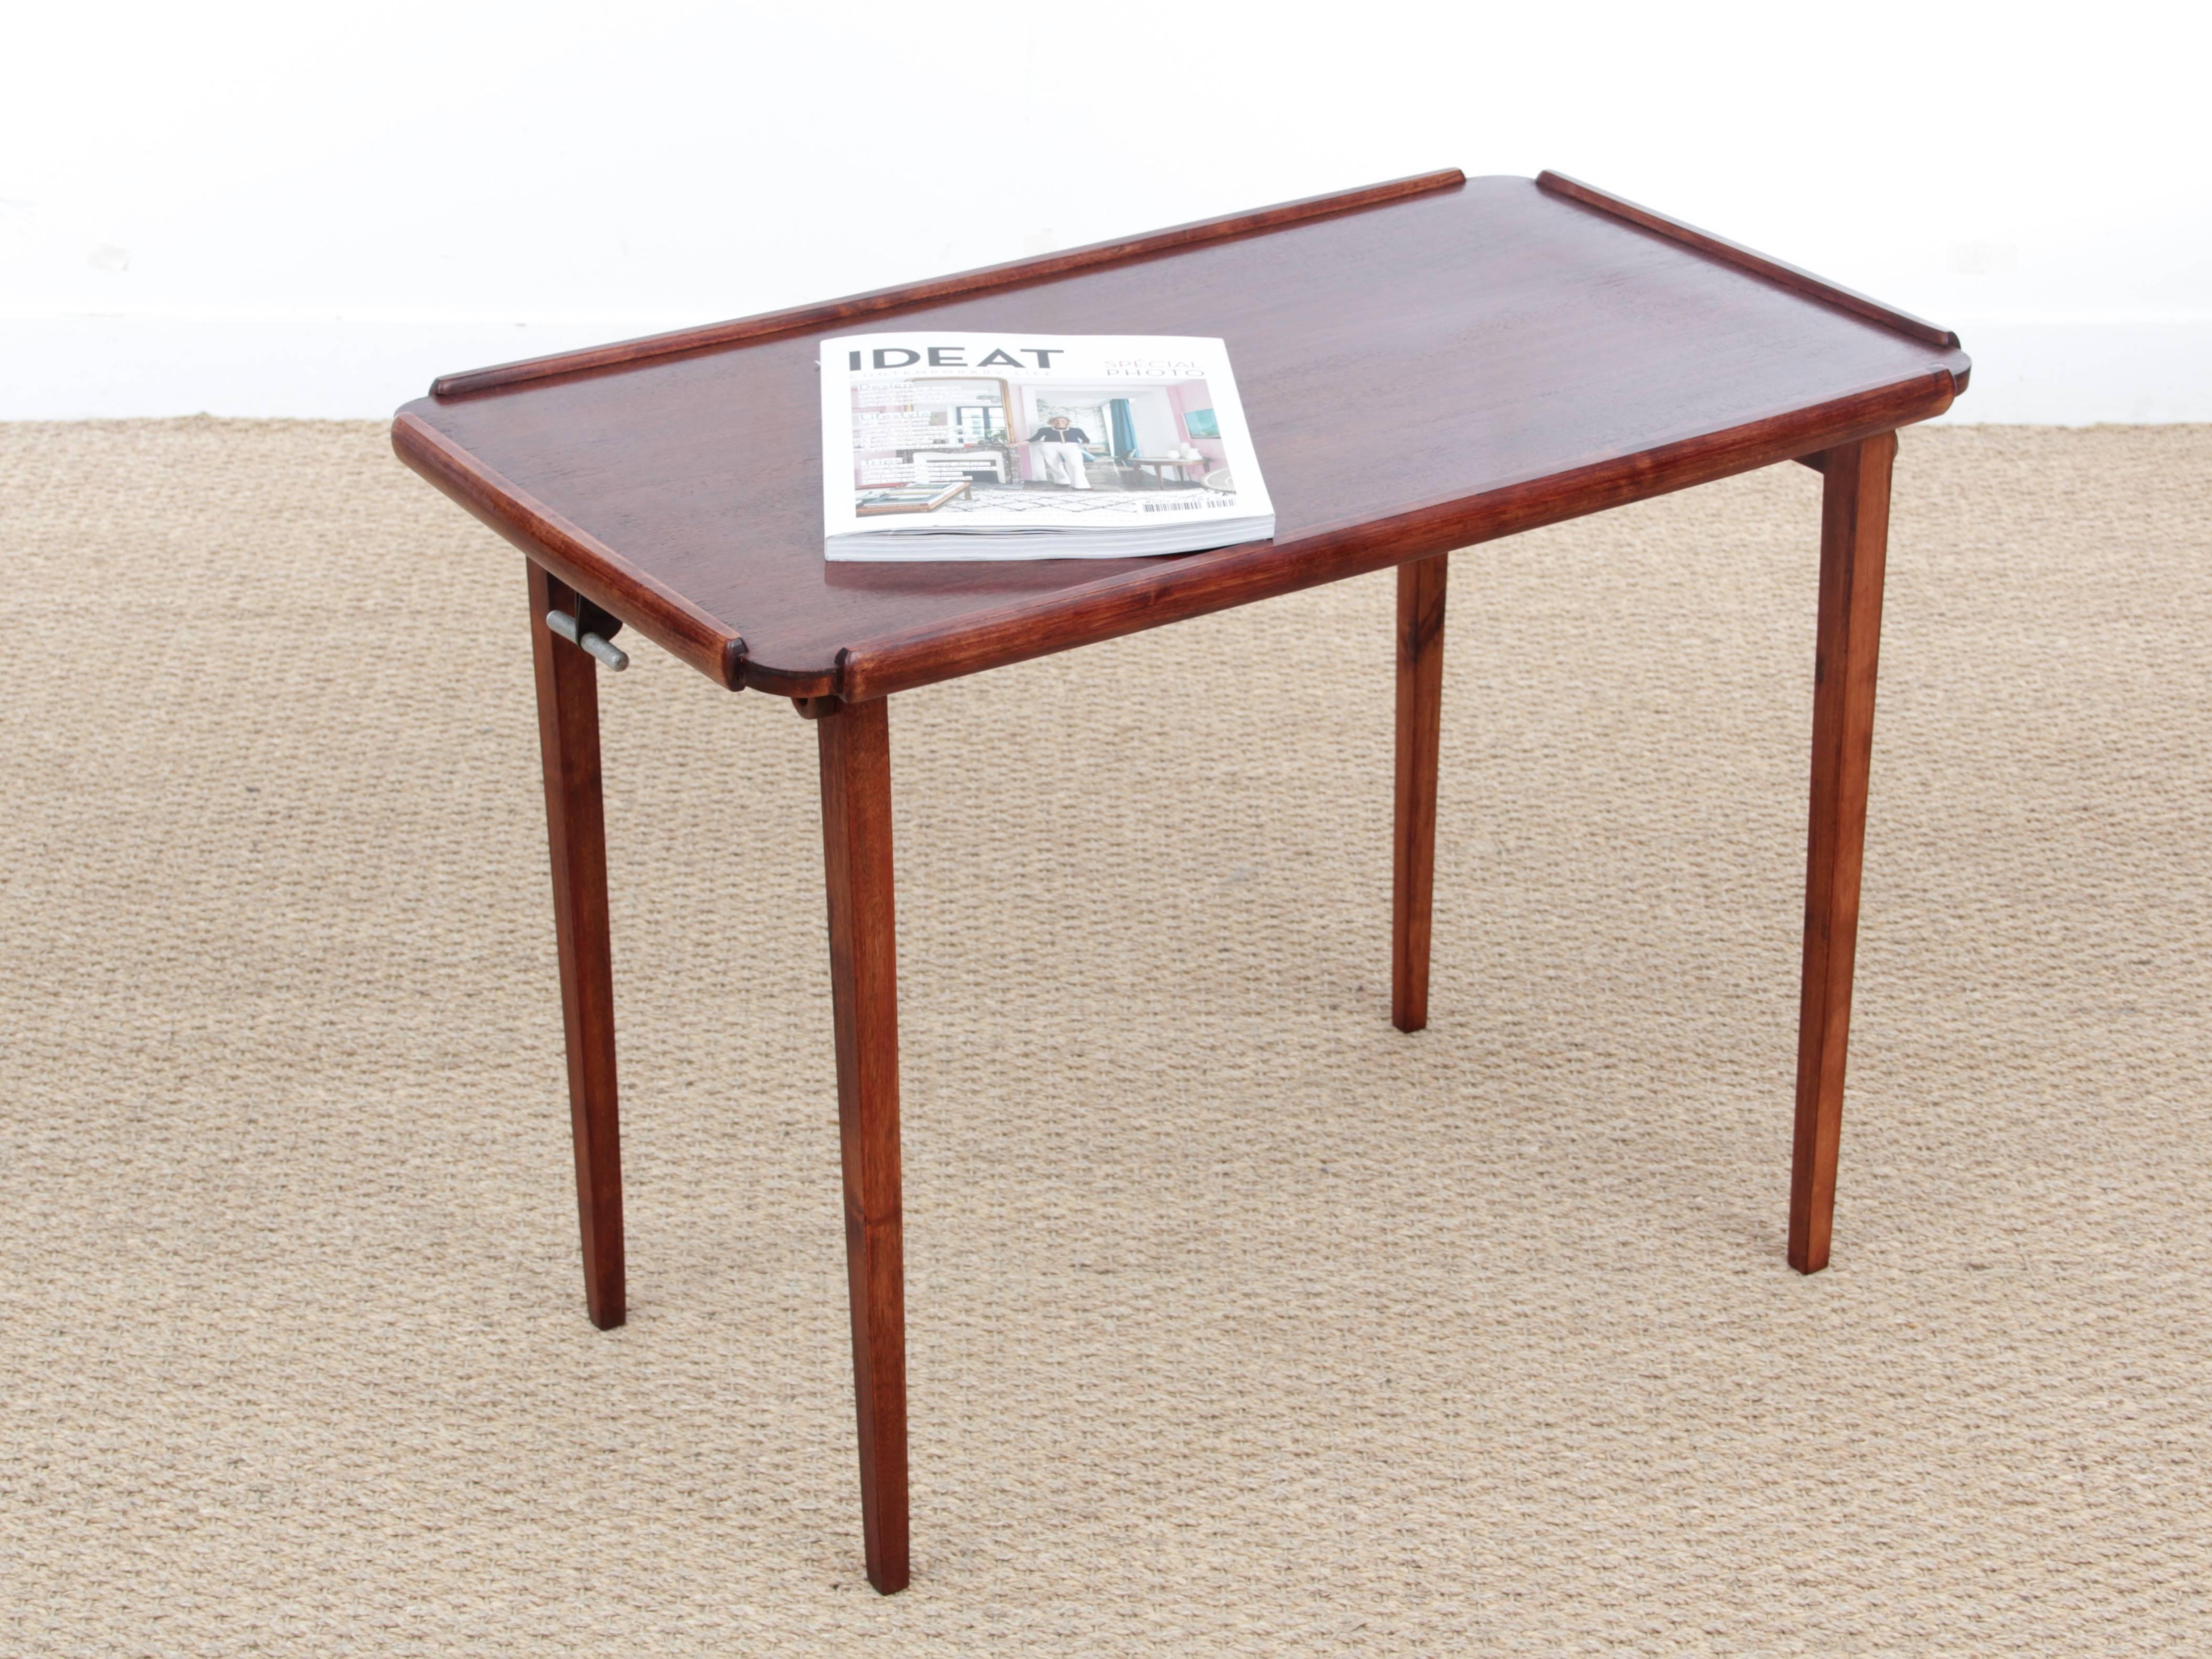 Mid-Century modern scandinavianfolding table in mahogany. An ingenious spring leaf system allows automatic opening and folding.
Swedish work from the 50s.